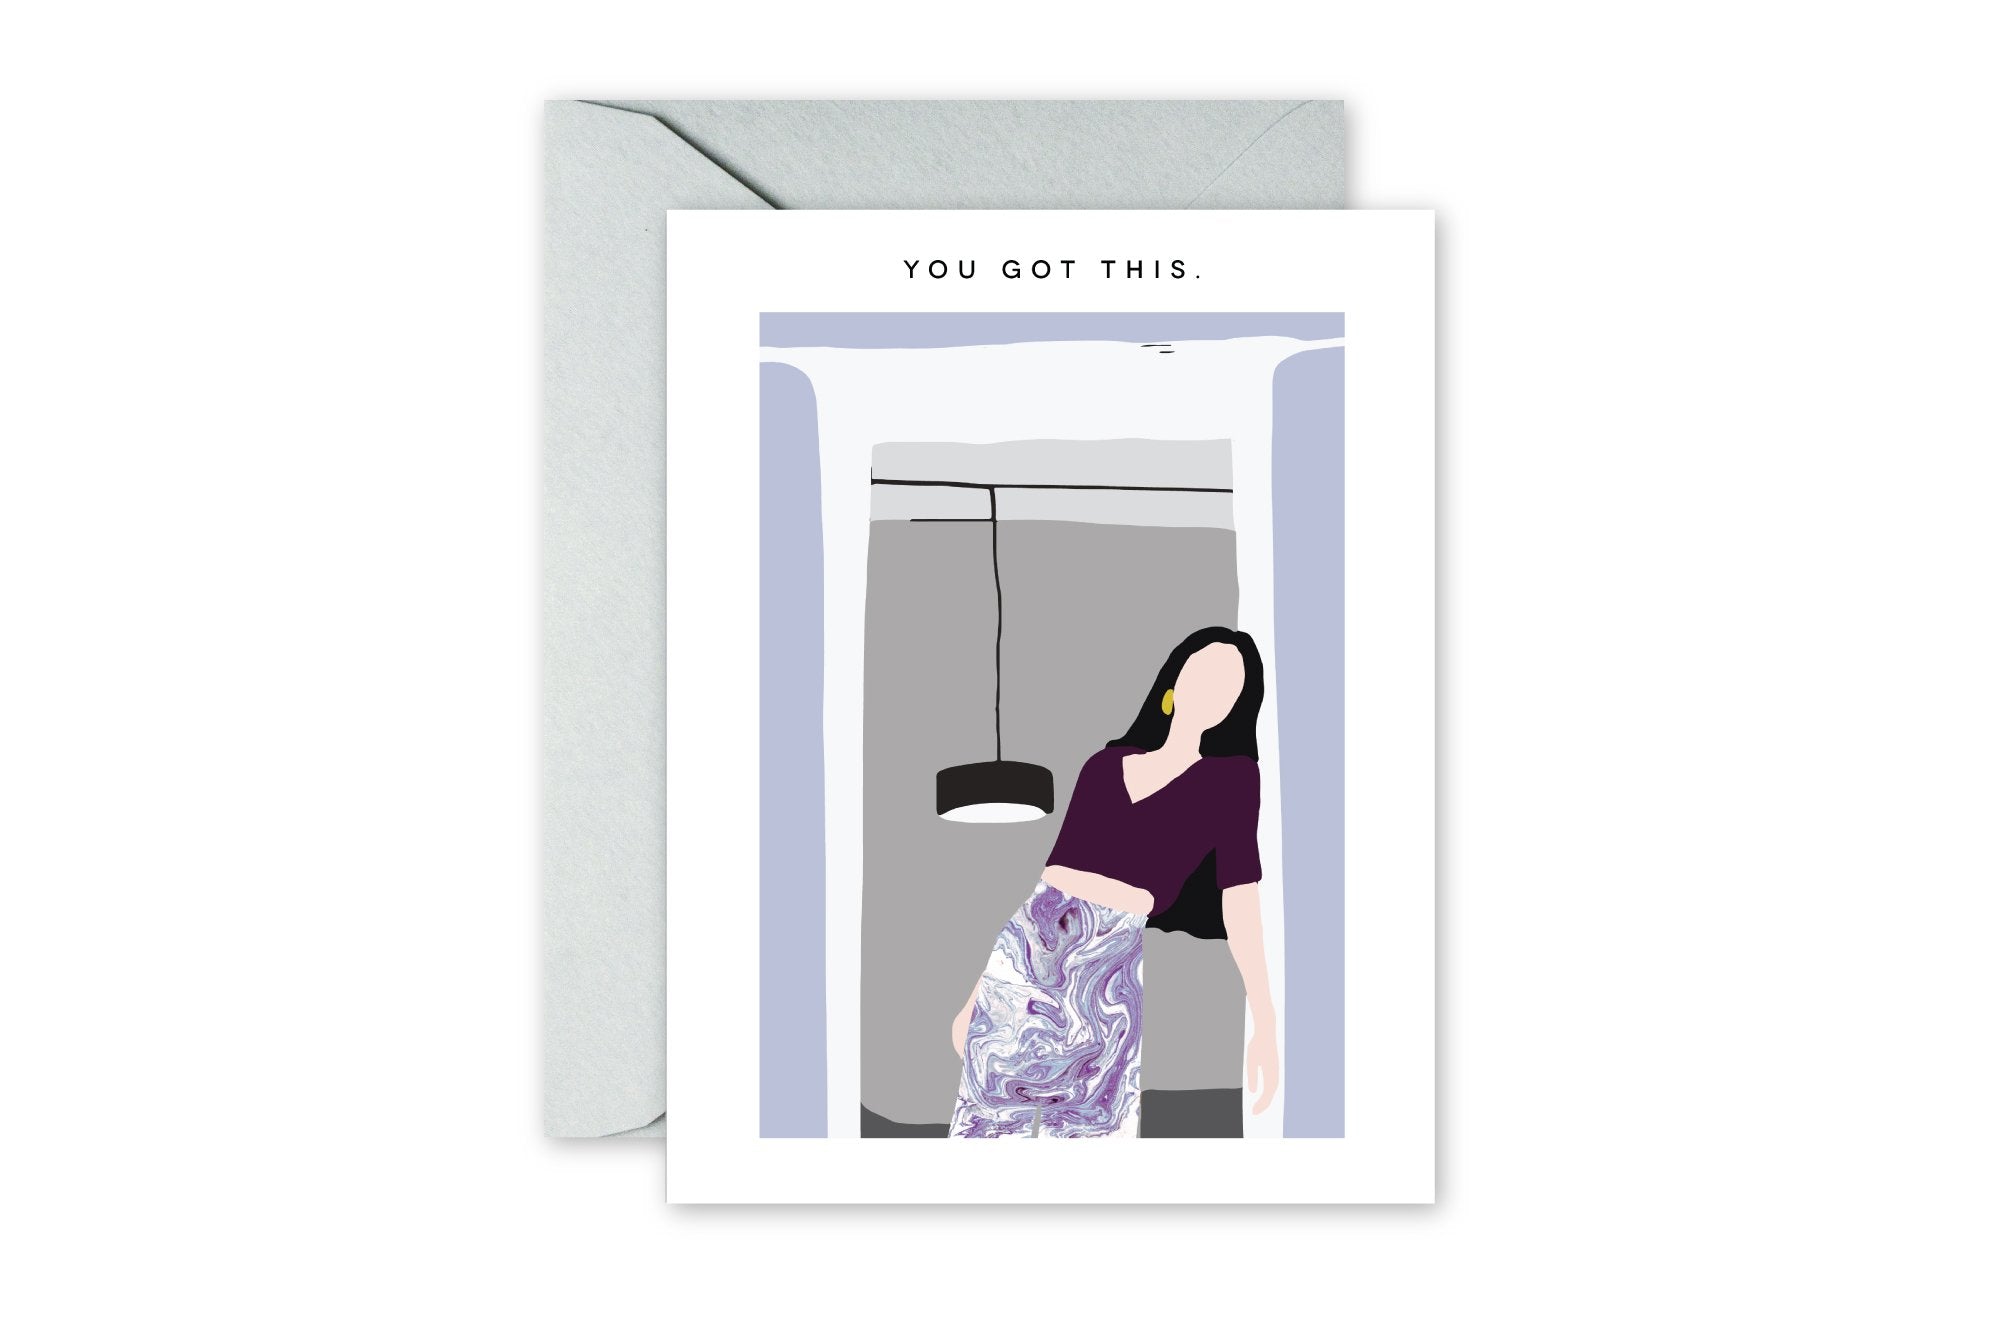 YOU GOT THIS Encouraging greeting card.